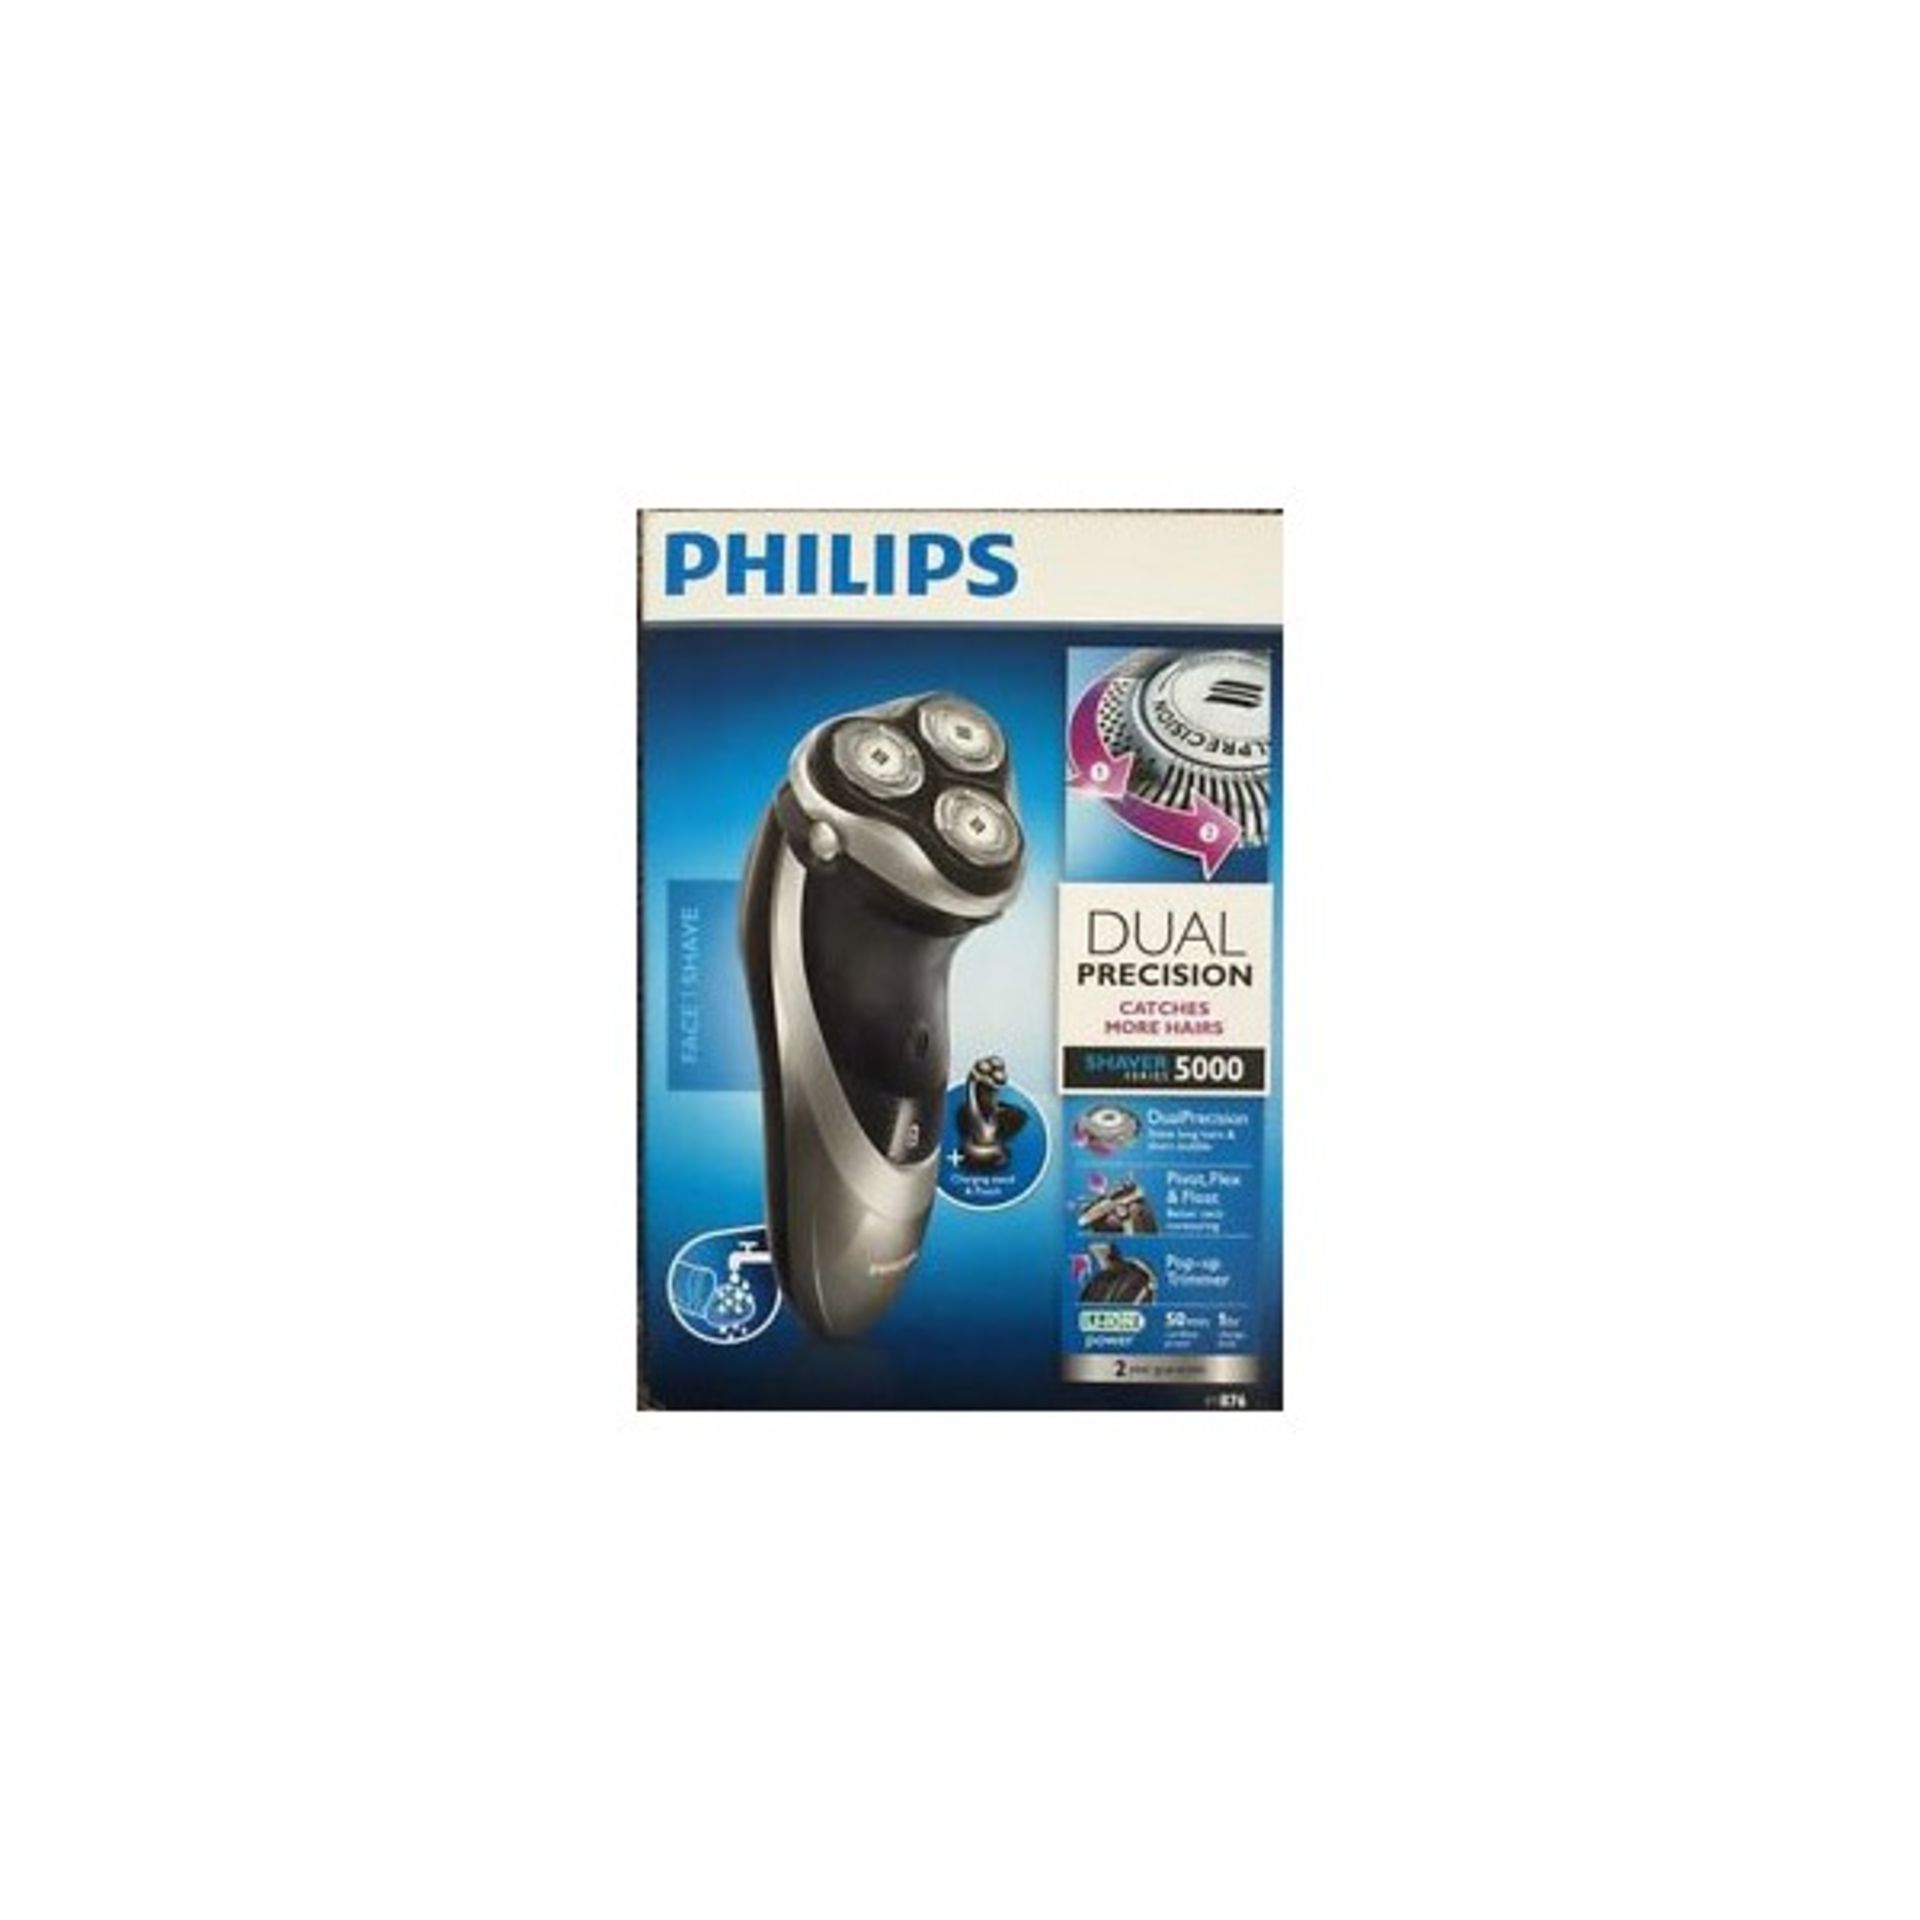 V Brand New Philips Shaver Series 5000 - 3 Head Dual Precision Dry Electric Shaver - Flex and Rotate